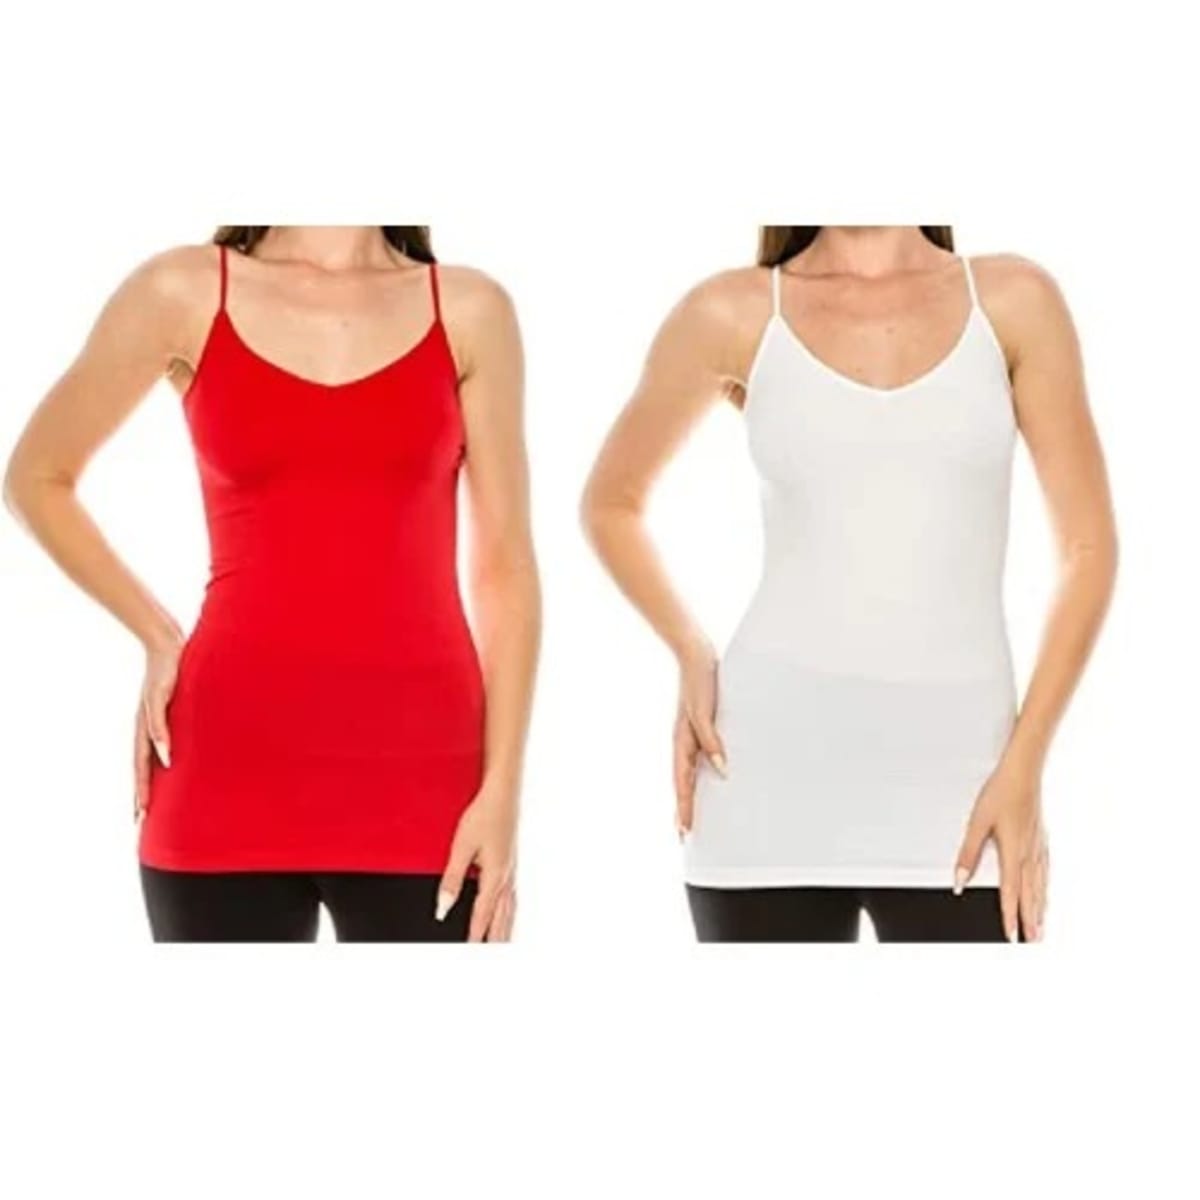 Ladies Stretchy Camisole- White & Red -2pieces